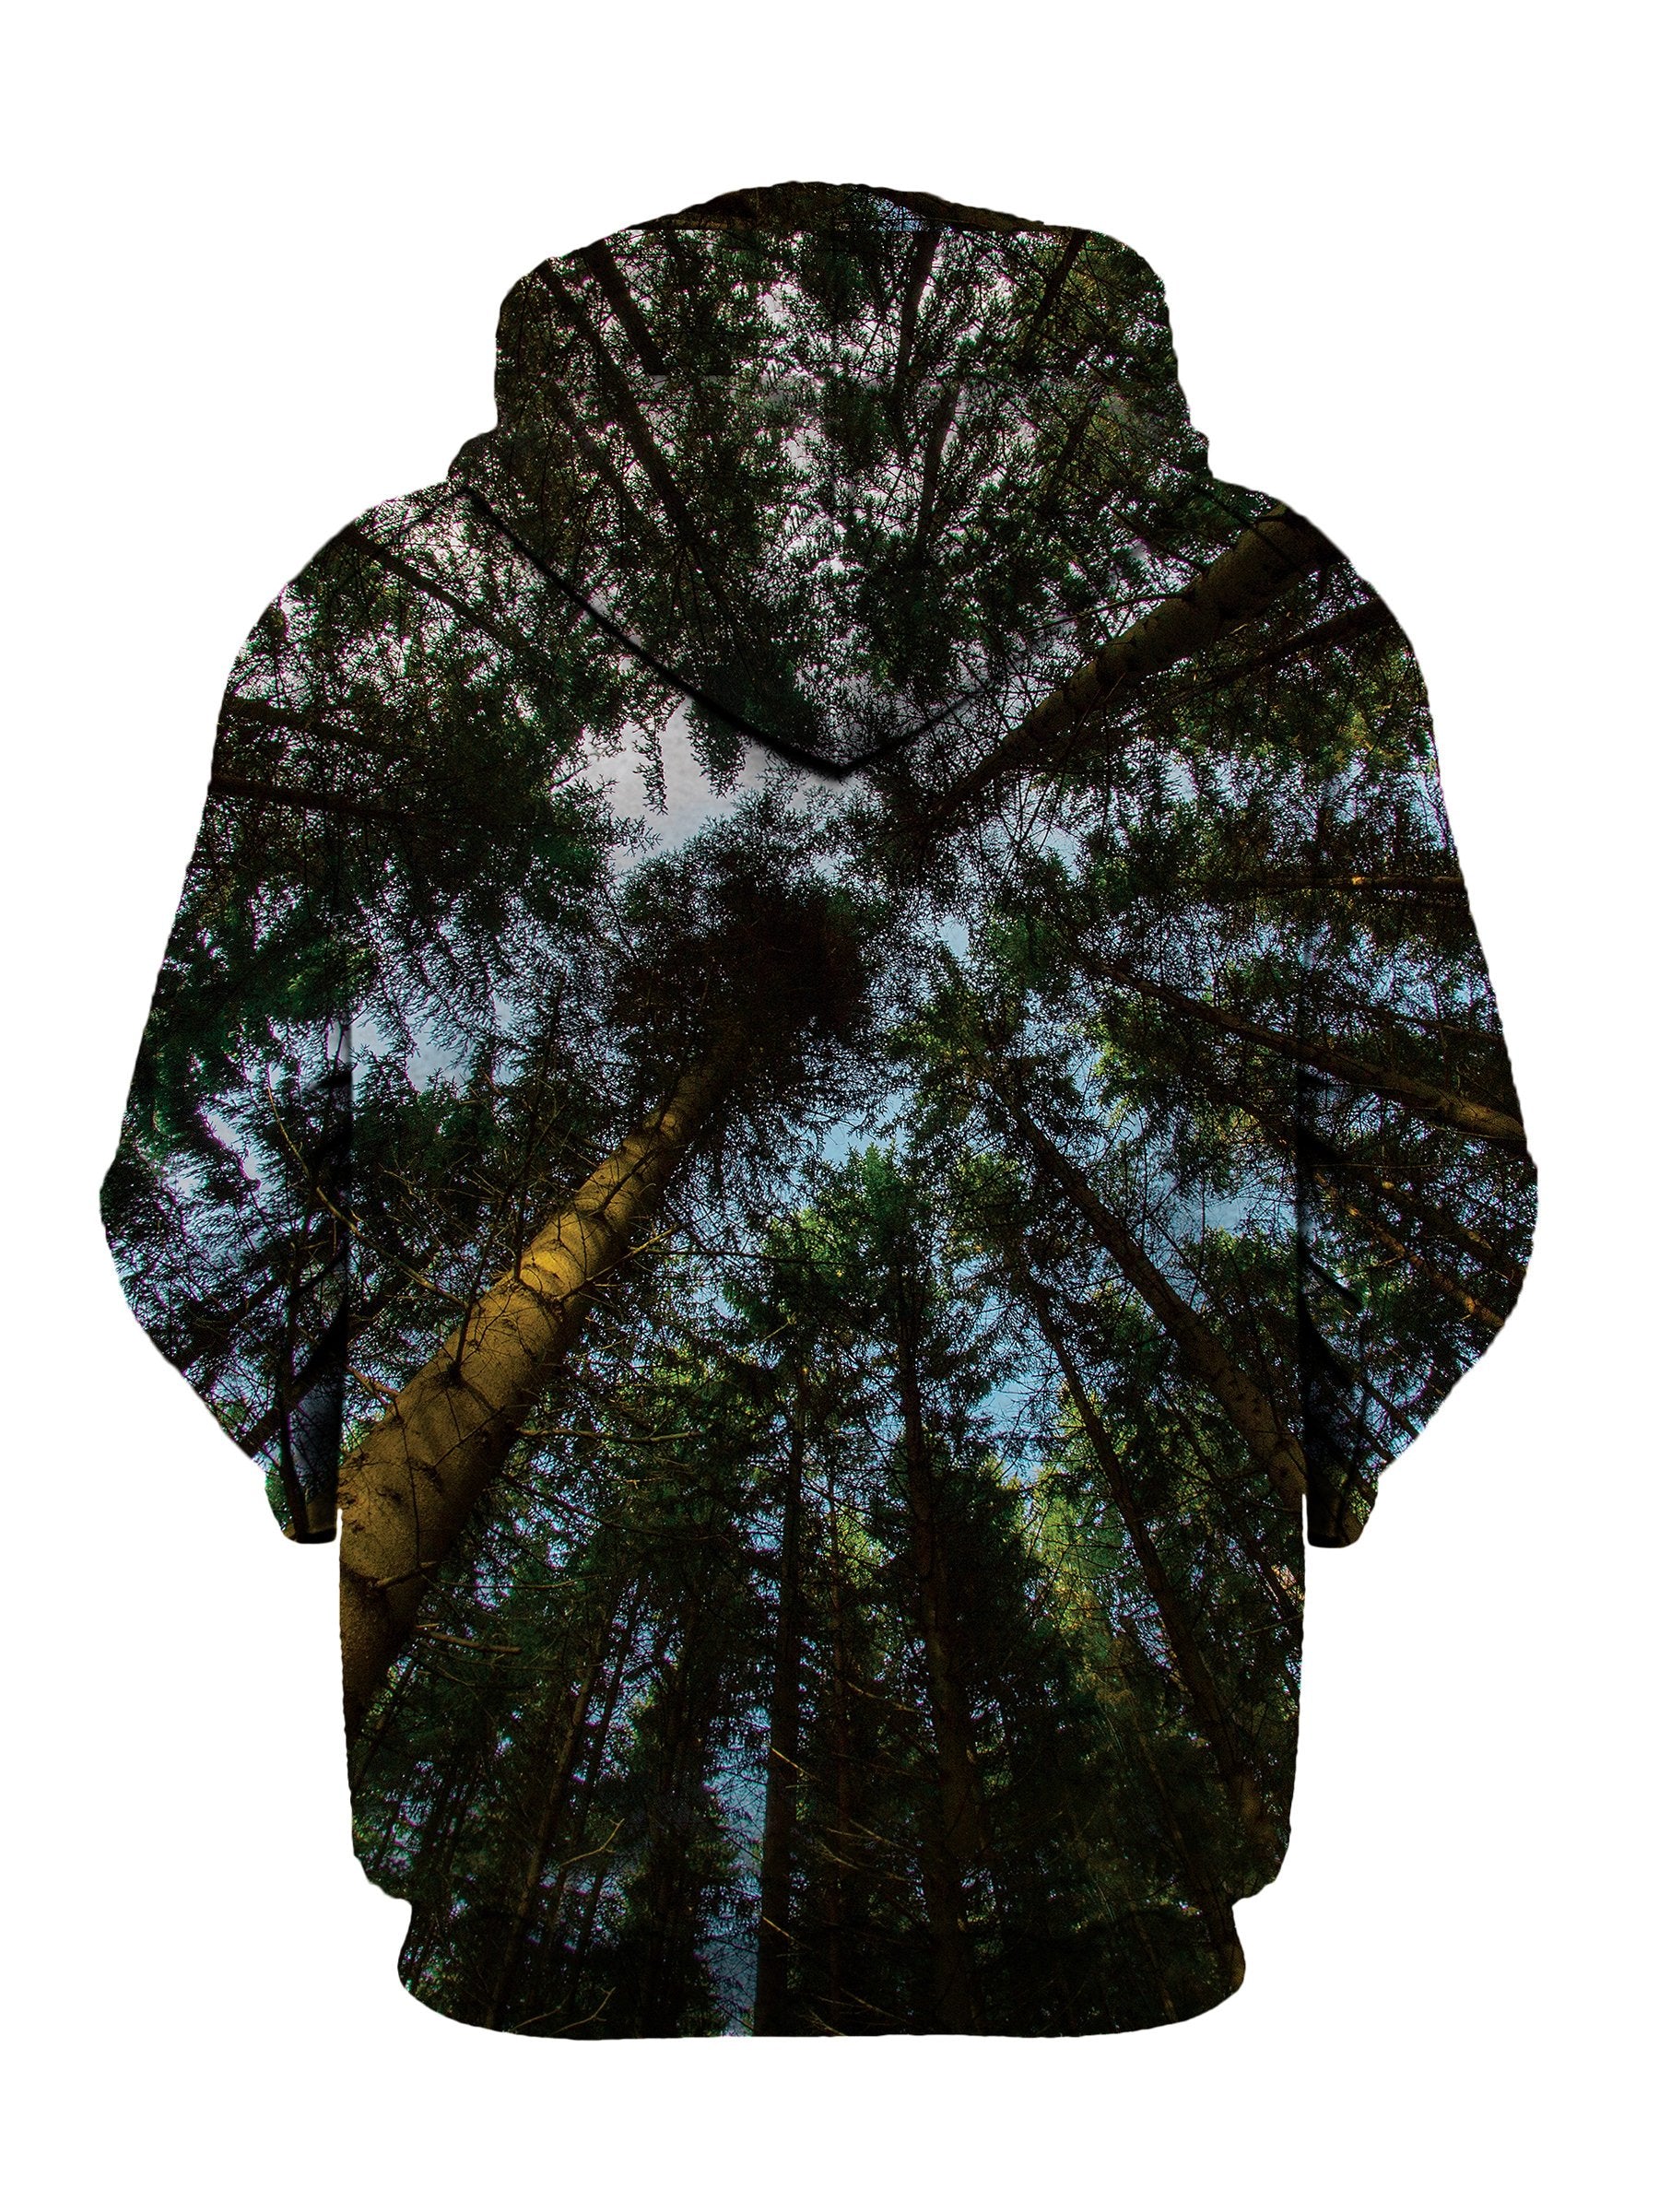 Trippy Worms Eye View Forest Hoodie Back View